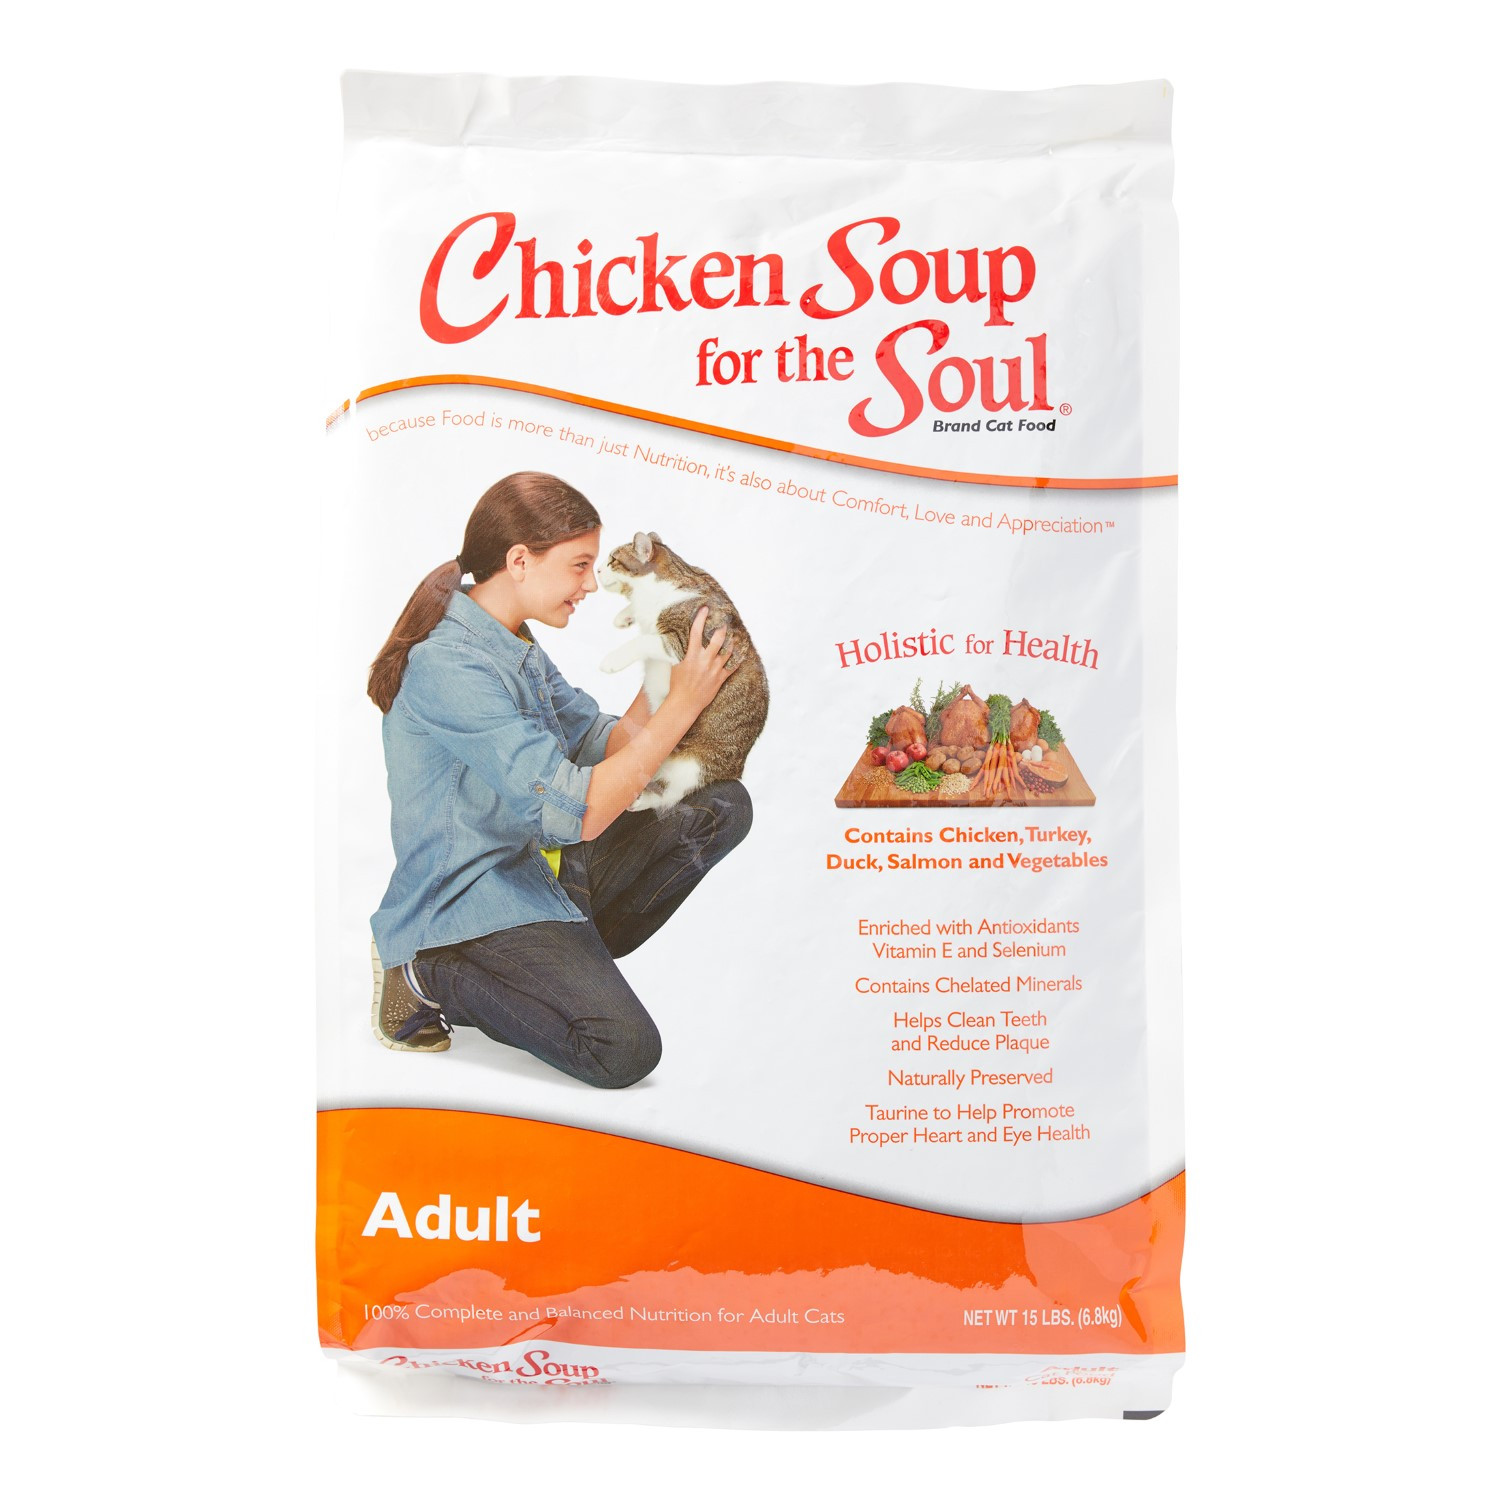 Chicken Soup Cat Food
 Chicken Soup For The Soul Life Stages Dry Cat Food 15 lb